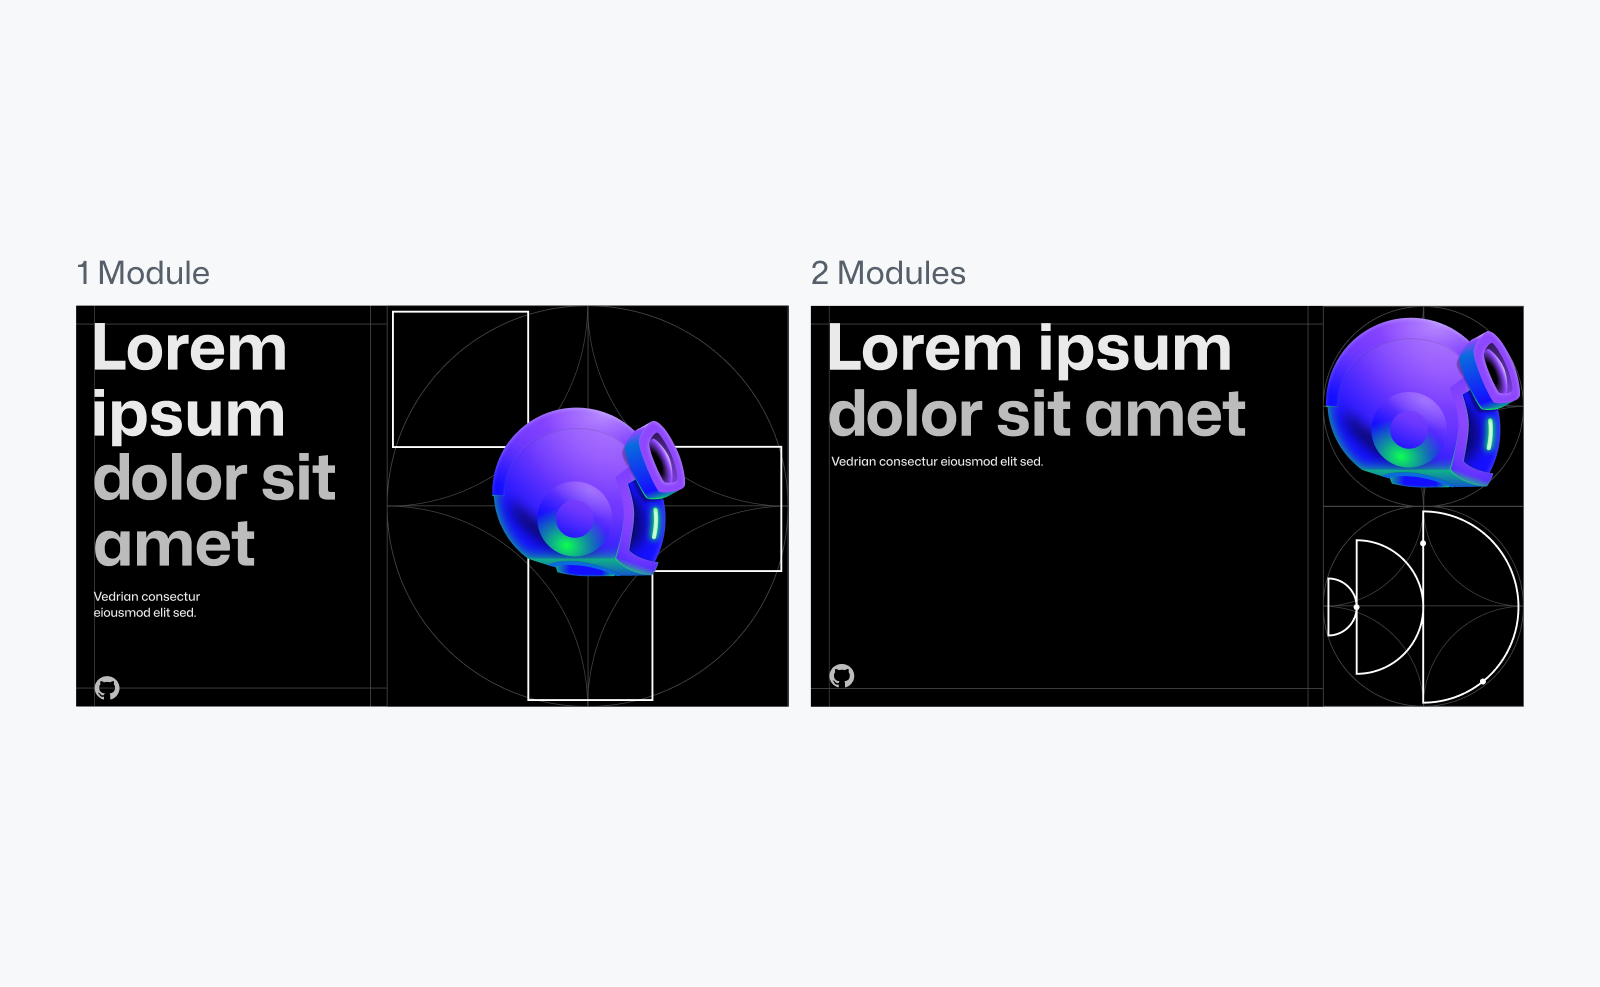 Two black landscape rectangular compositions side by side. Text above them reads "1 module" and "2 modules" respectively. Compositions feature placeholder lorem ipsum text on the left in white and light gray, with abstract illustrations on the right.